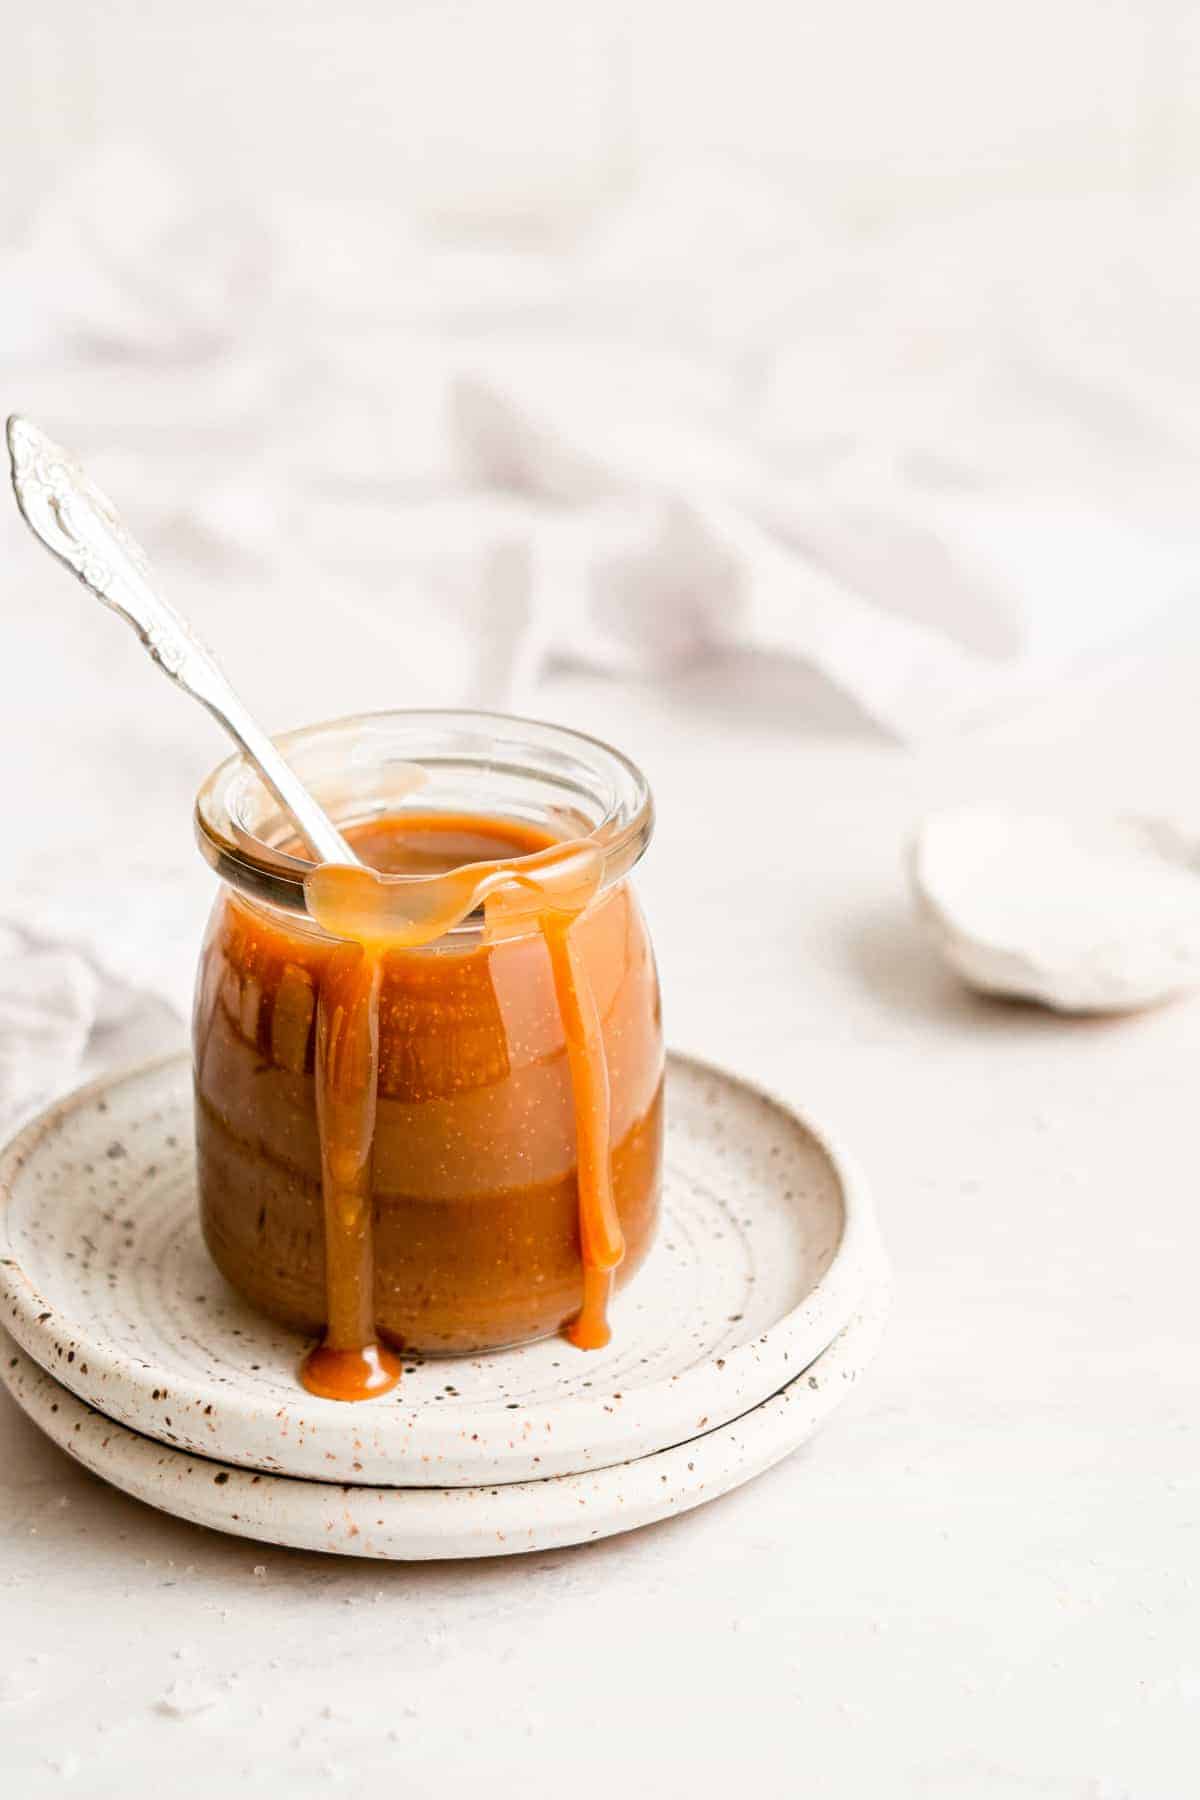 Vegan caramel sauce in a jar, with some caramel dripping down the side.